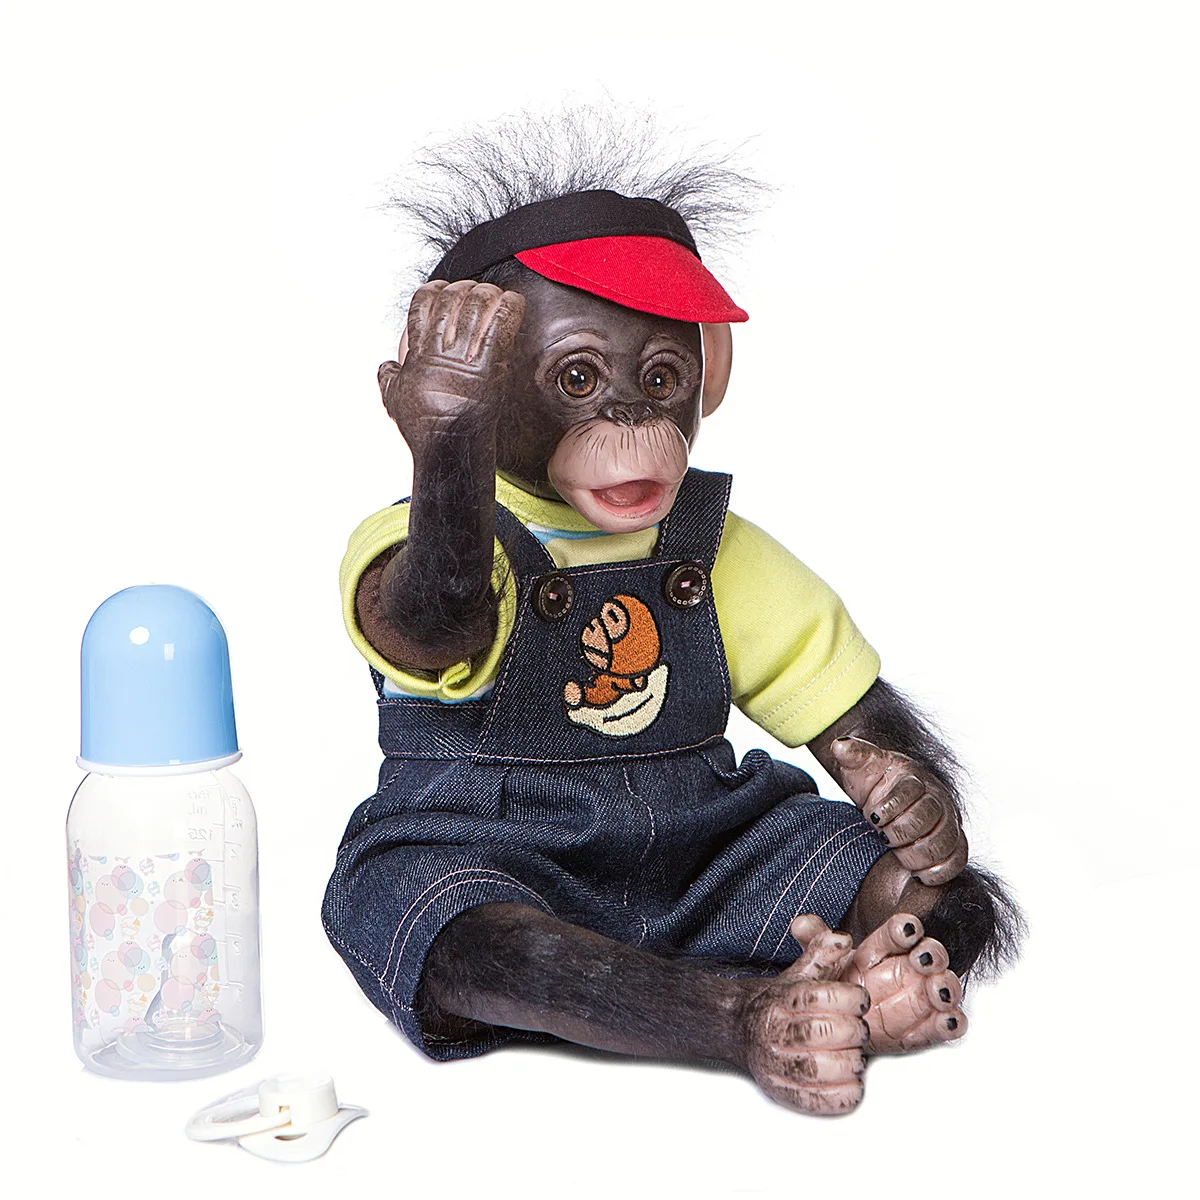 Mini Monkey Baby Twin Very Soft Flexible Silicone Reborn Premie Collecible Art Doll Detailed Hand Made Lifelike Children's Gifts pekny bosa kids shoes ankle boots children barefoot hiking shoes outdoor flexible climbing sneakers zapatos niña 부츠 신발 ブーツ